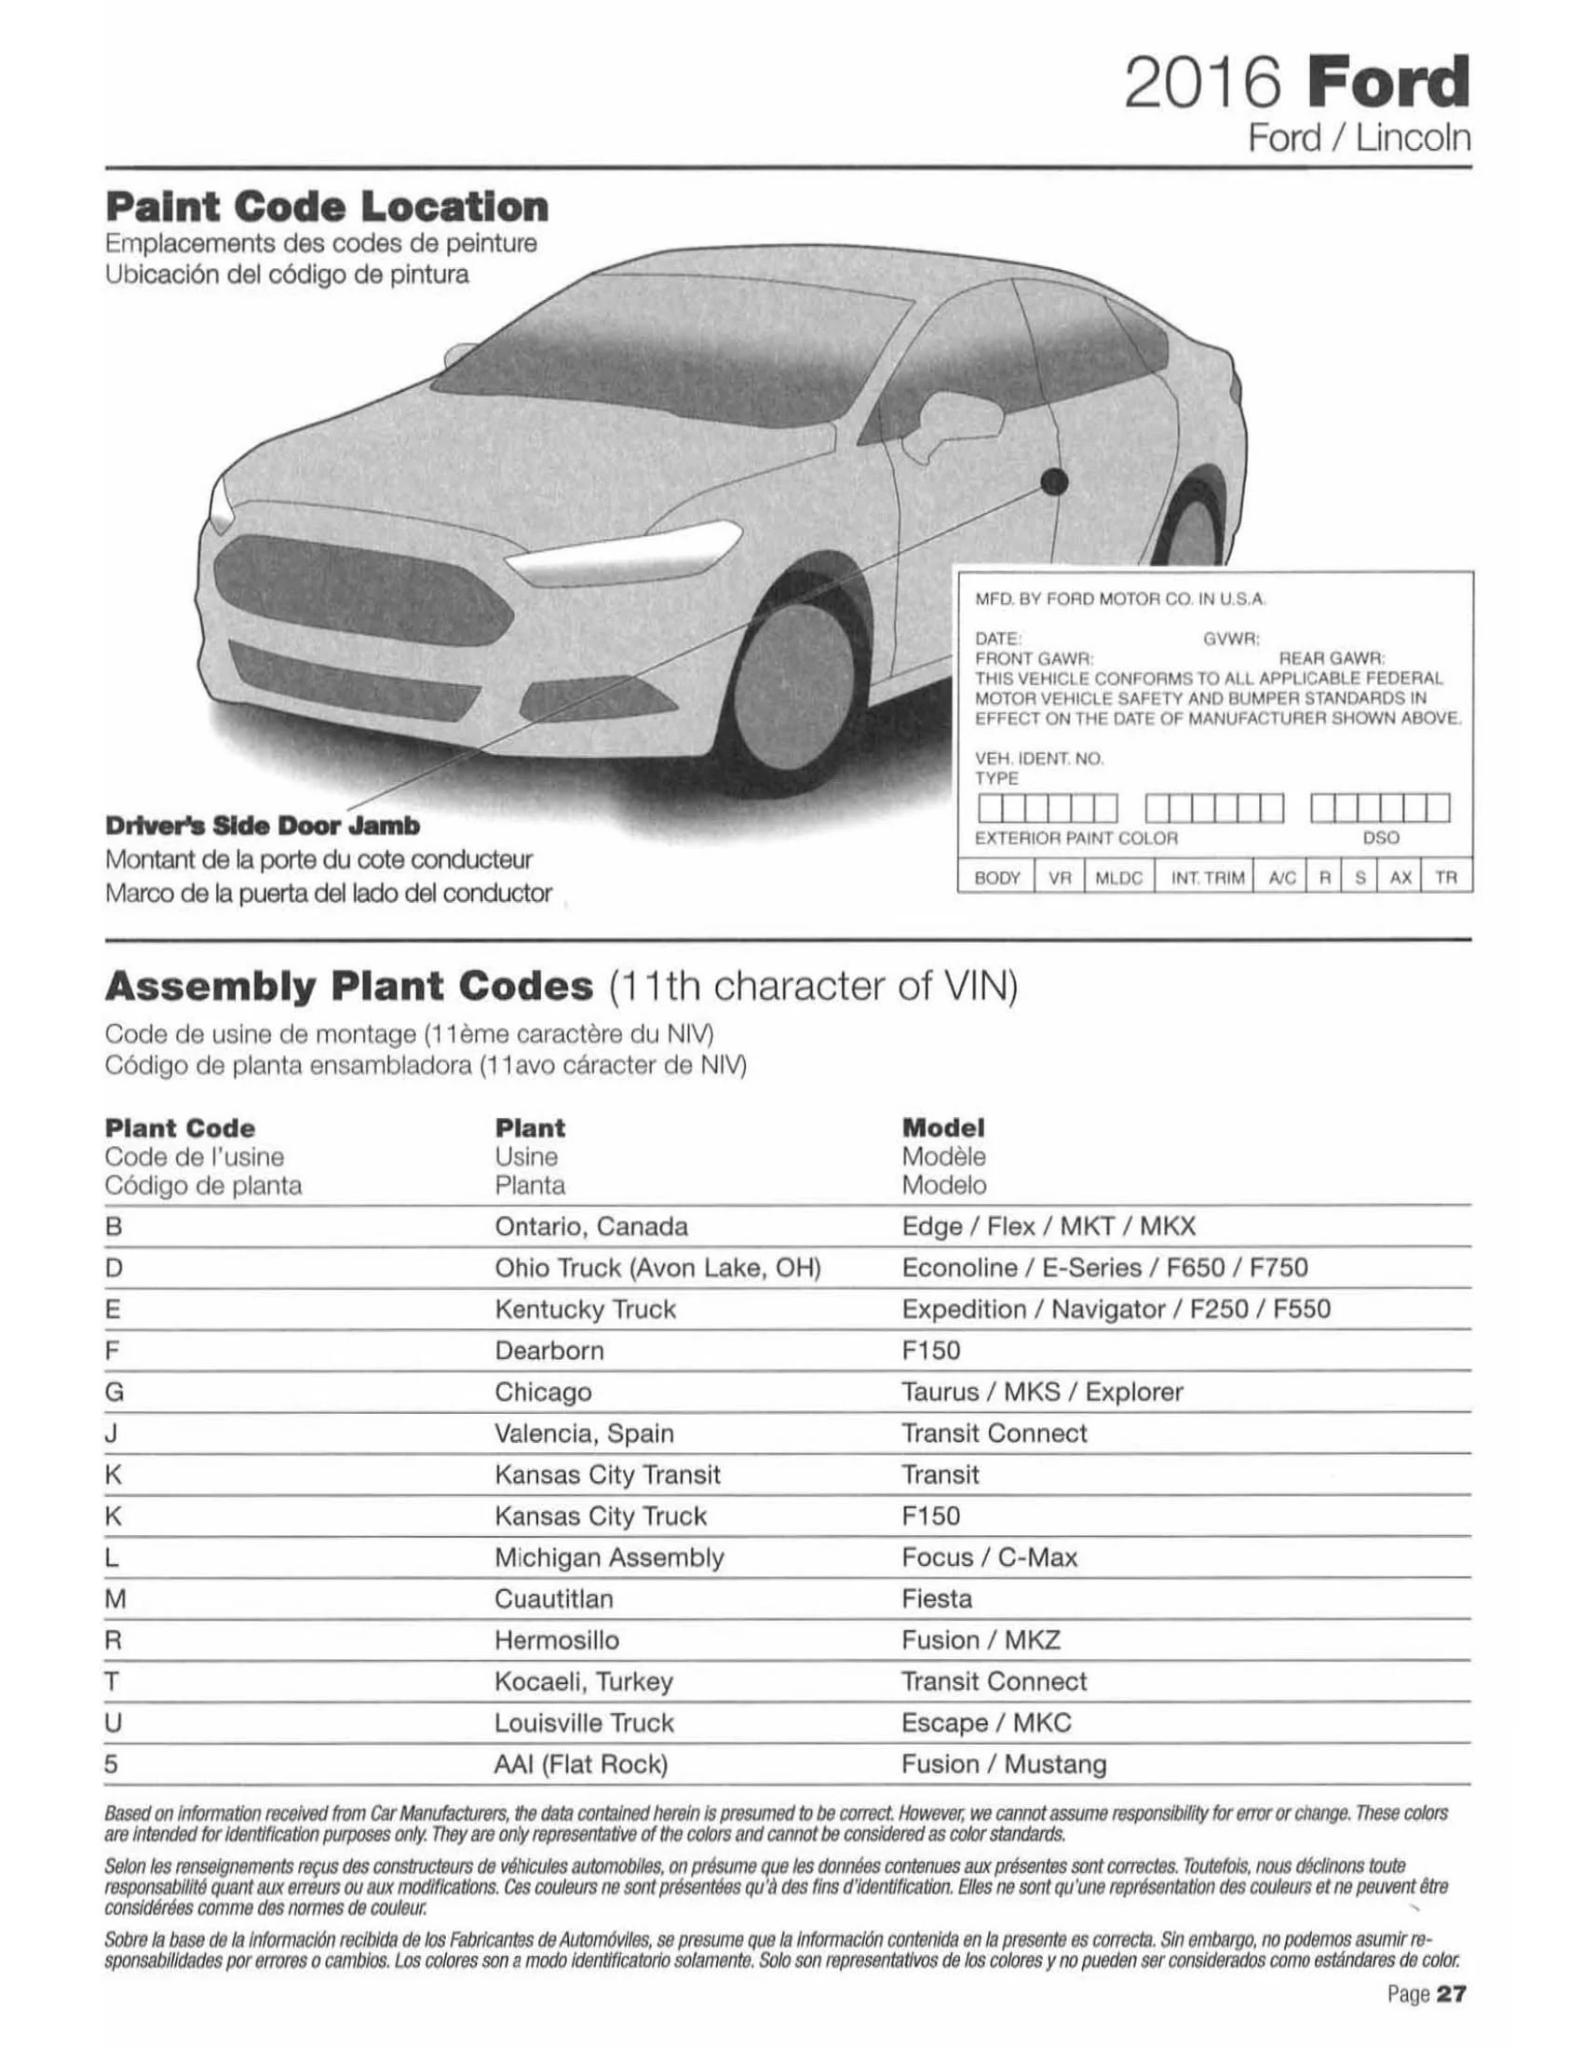 exterior paint code example by Ford Motor Company  for the 2016 models